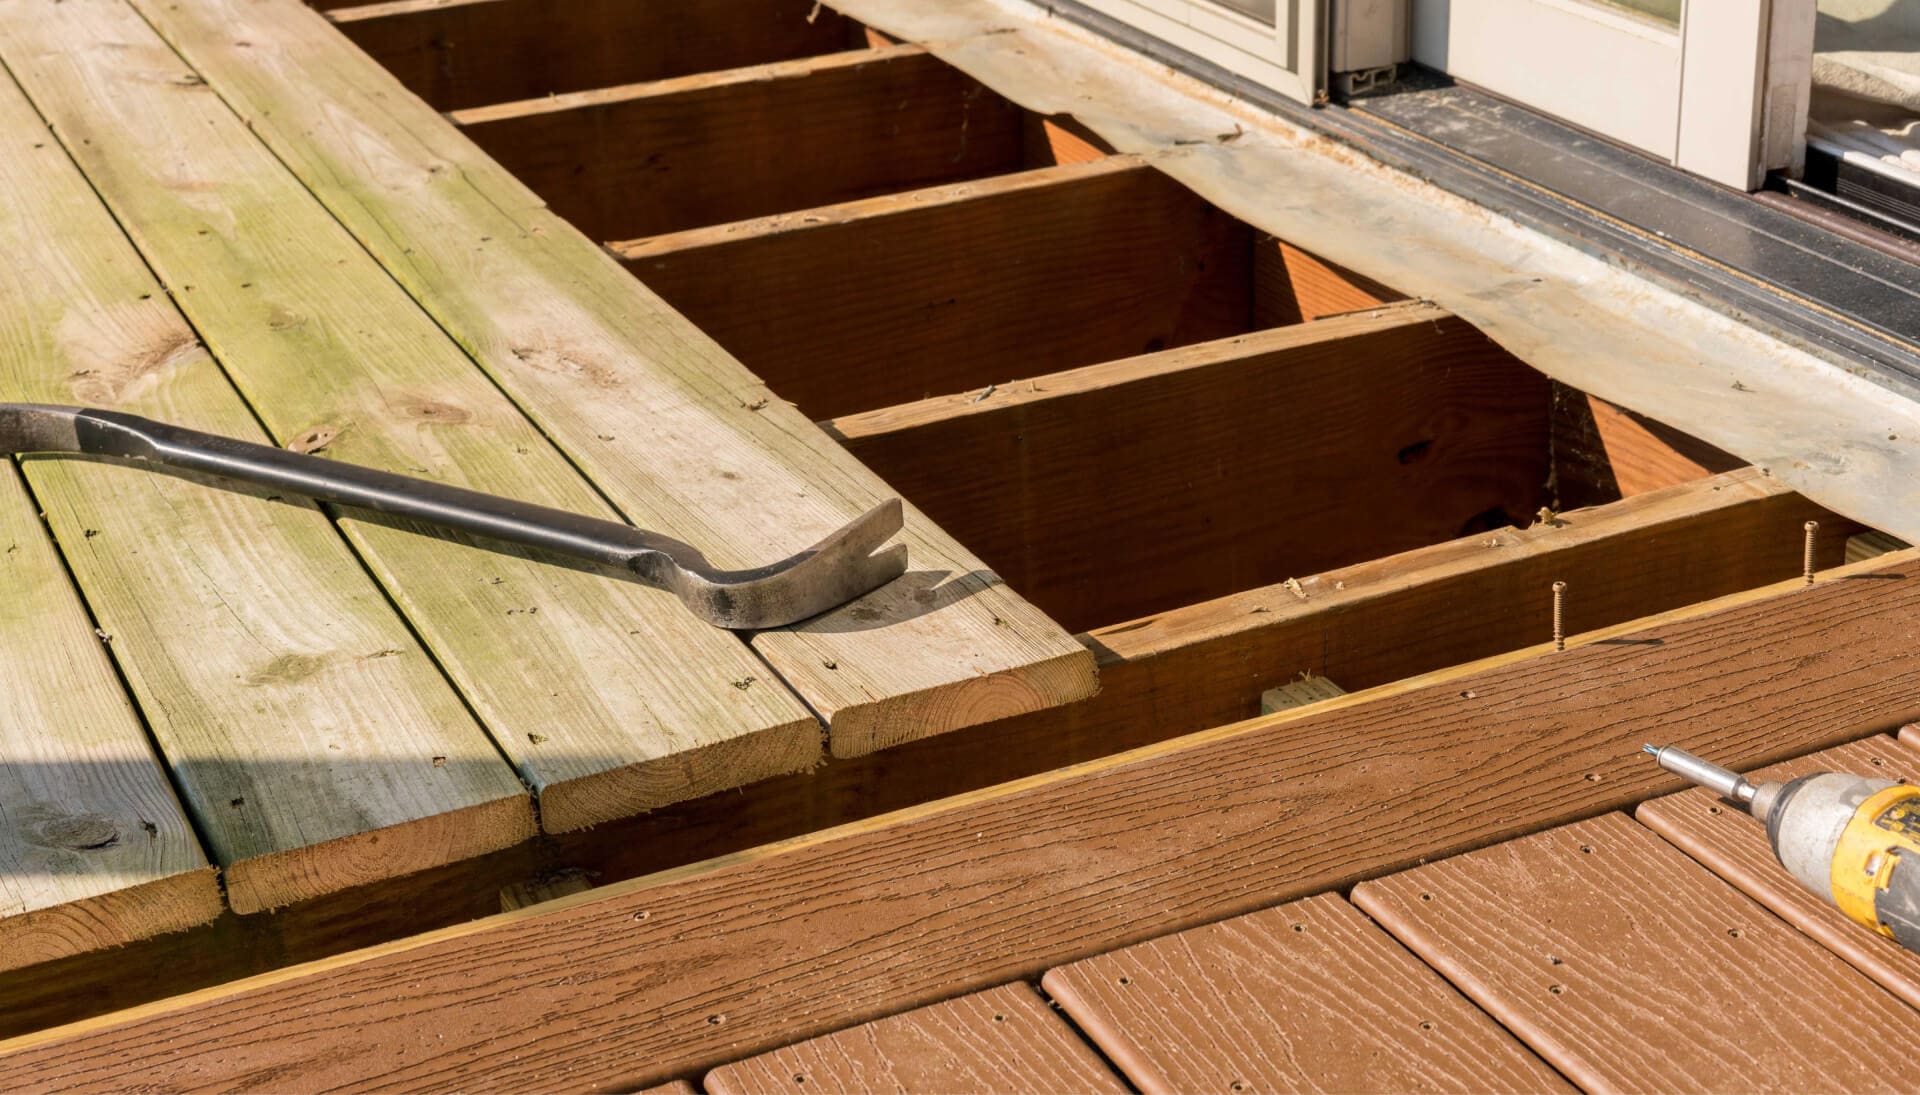 We offer the best deck repair services in Knoxville, Tennessee